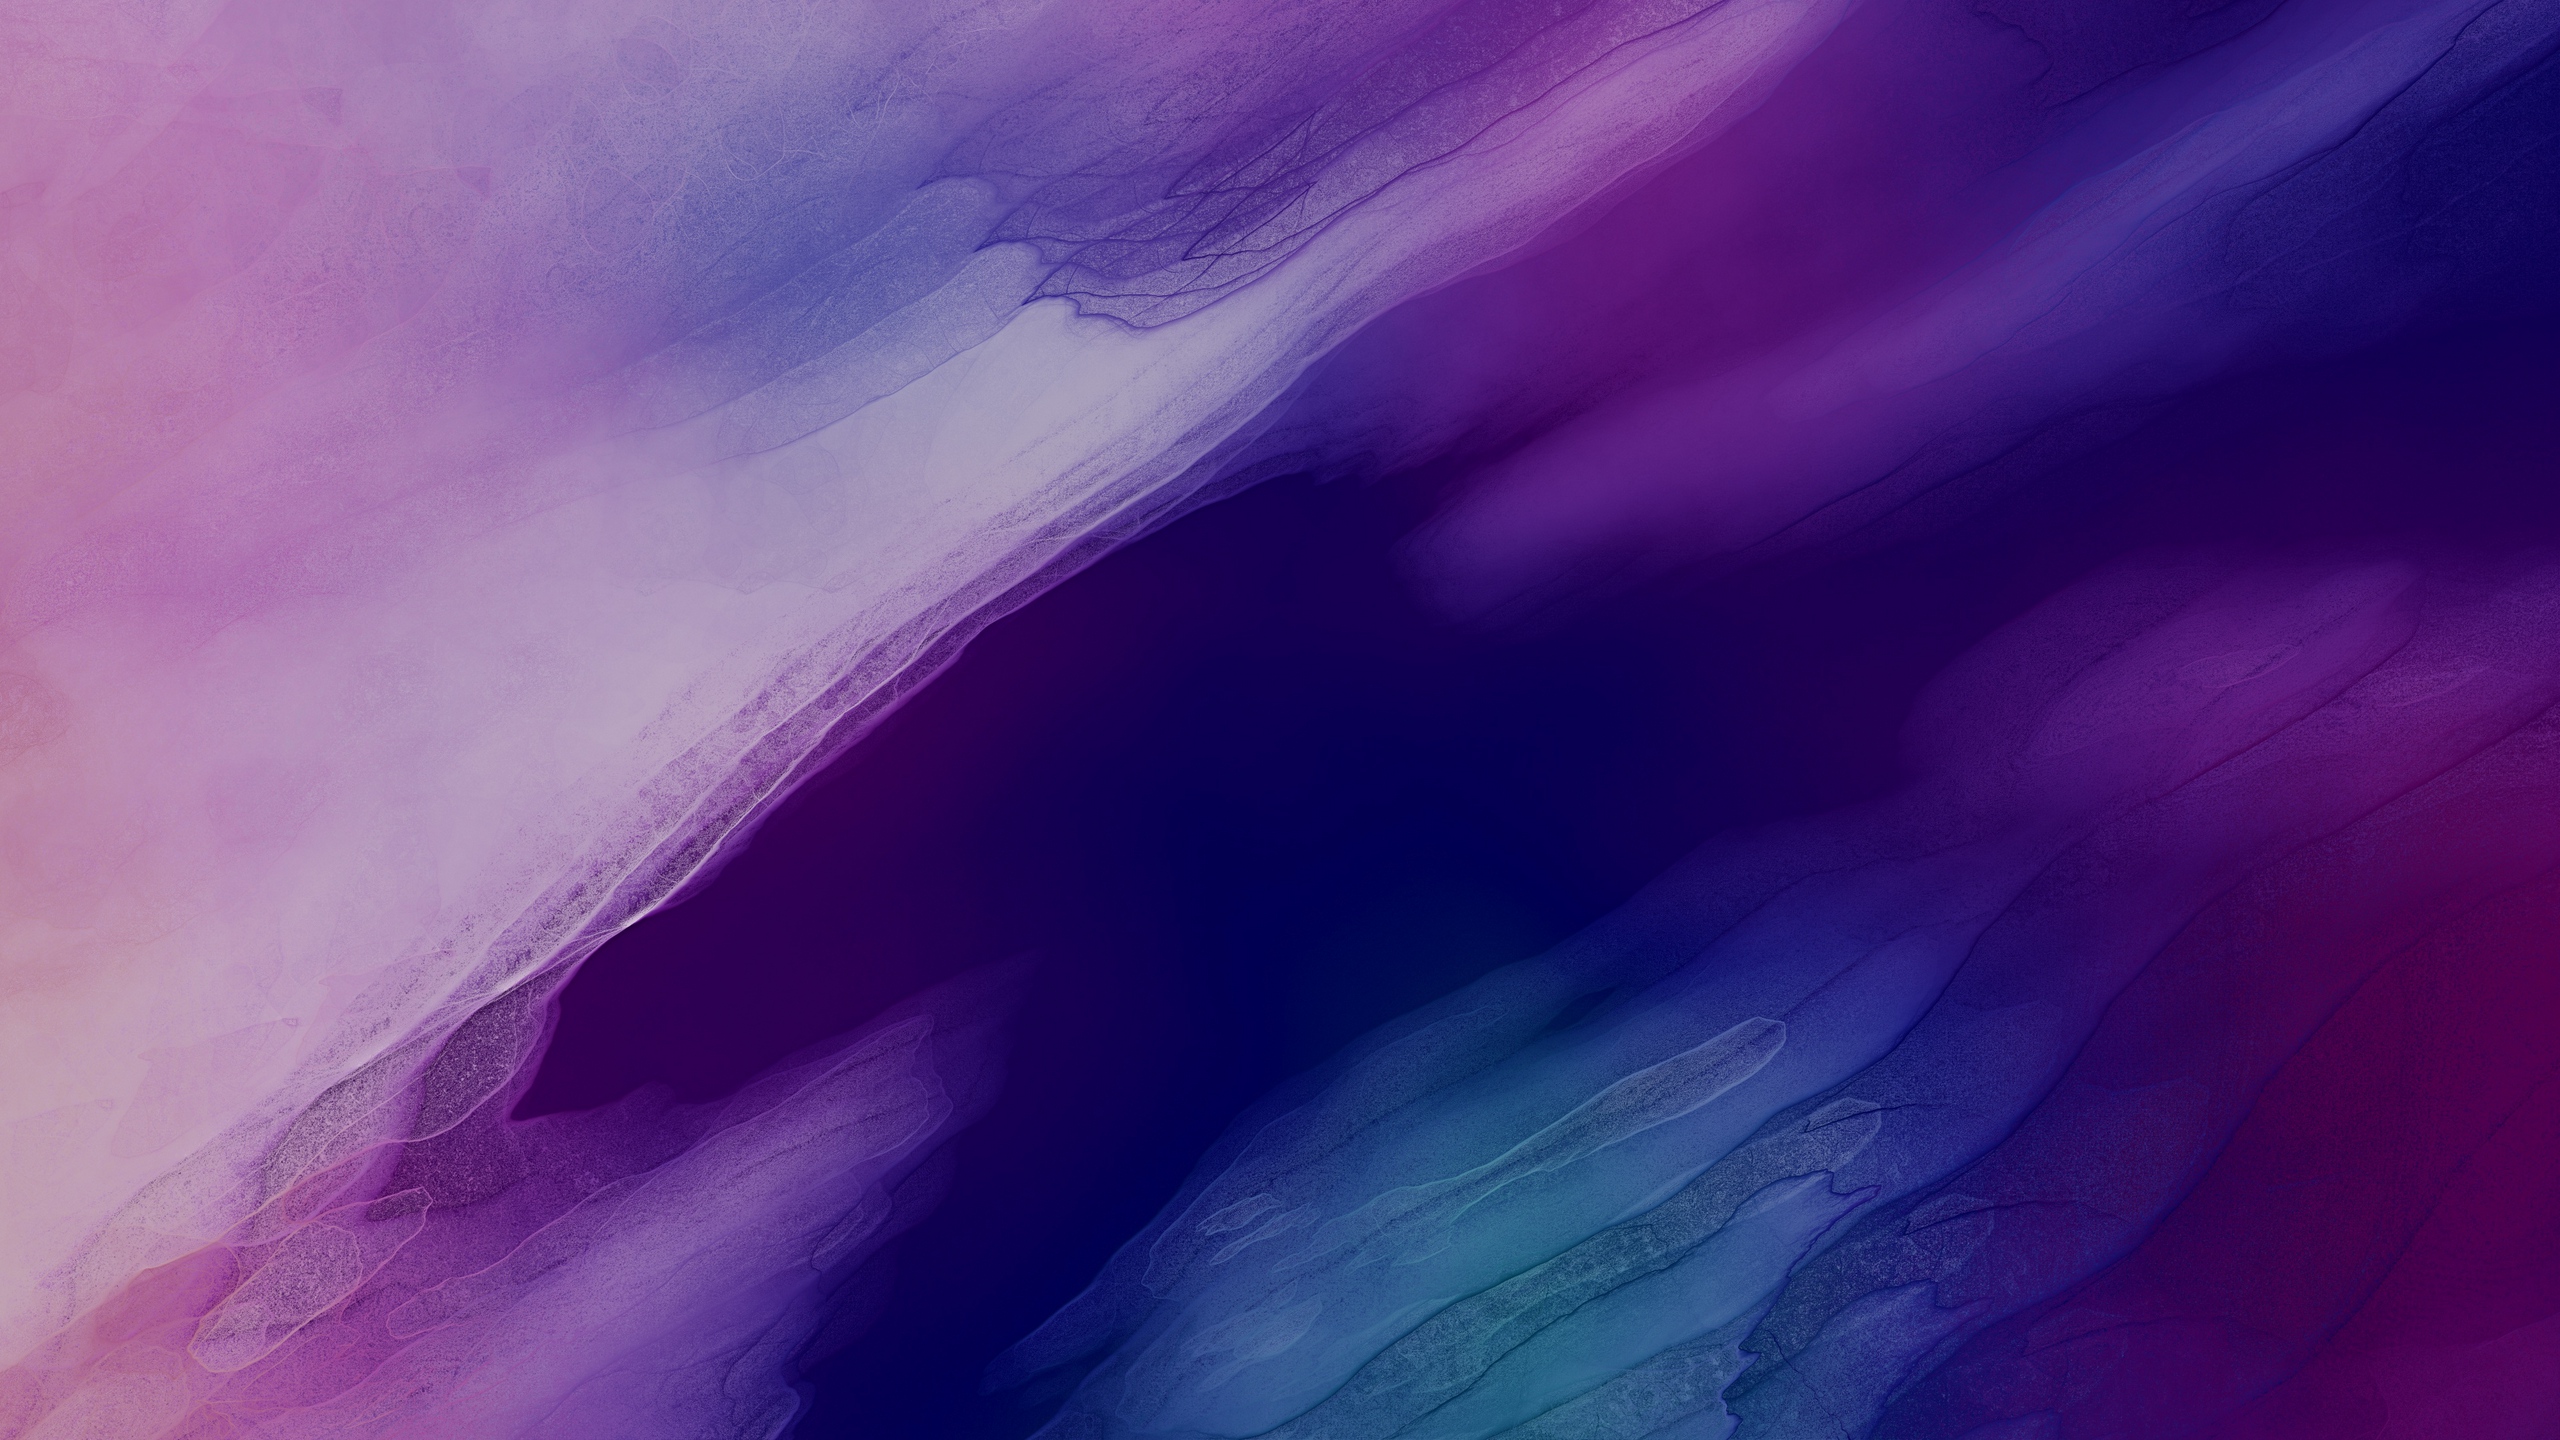 Wallpaper Stains, Purple, Gradient, Colorful - Purple Gradient Wallpaper 4k  - 2560x1440 Wallpaper 